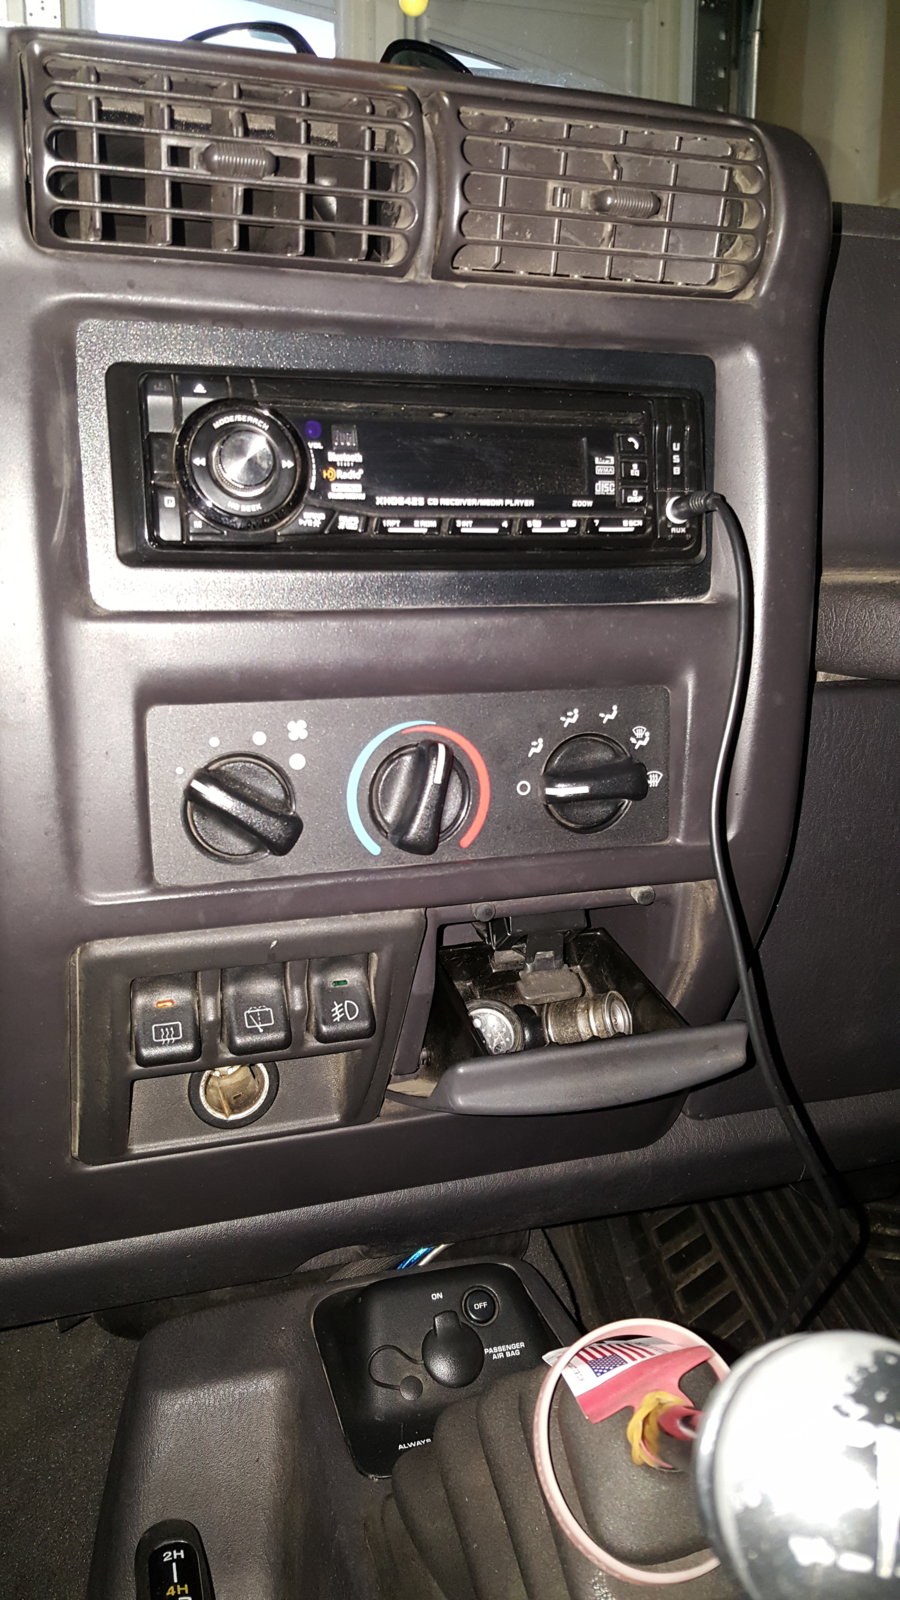 12V Auxiliary Power Outlet vs Cigar Lighter - Same Thing? | Jeep Wrangler TJ  Forum